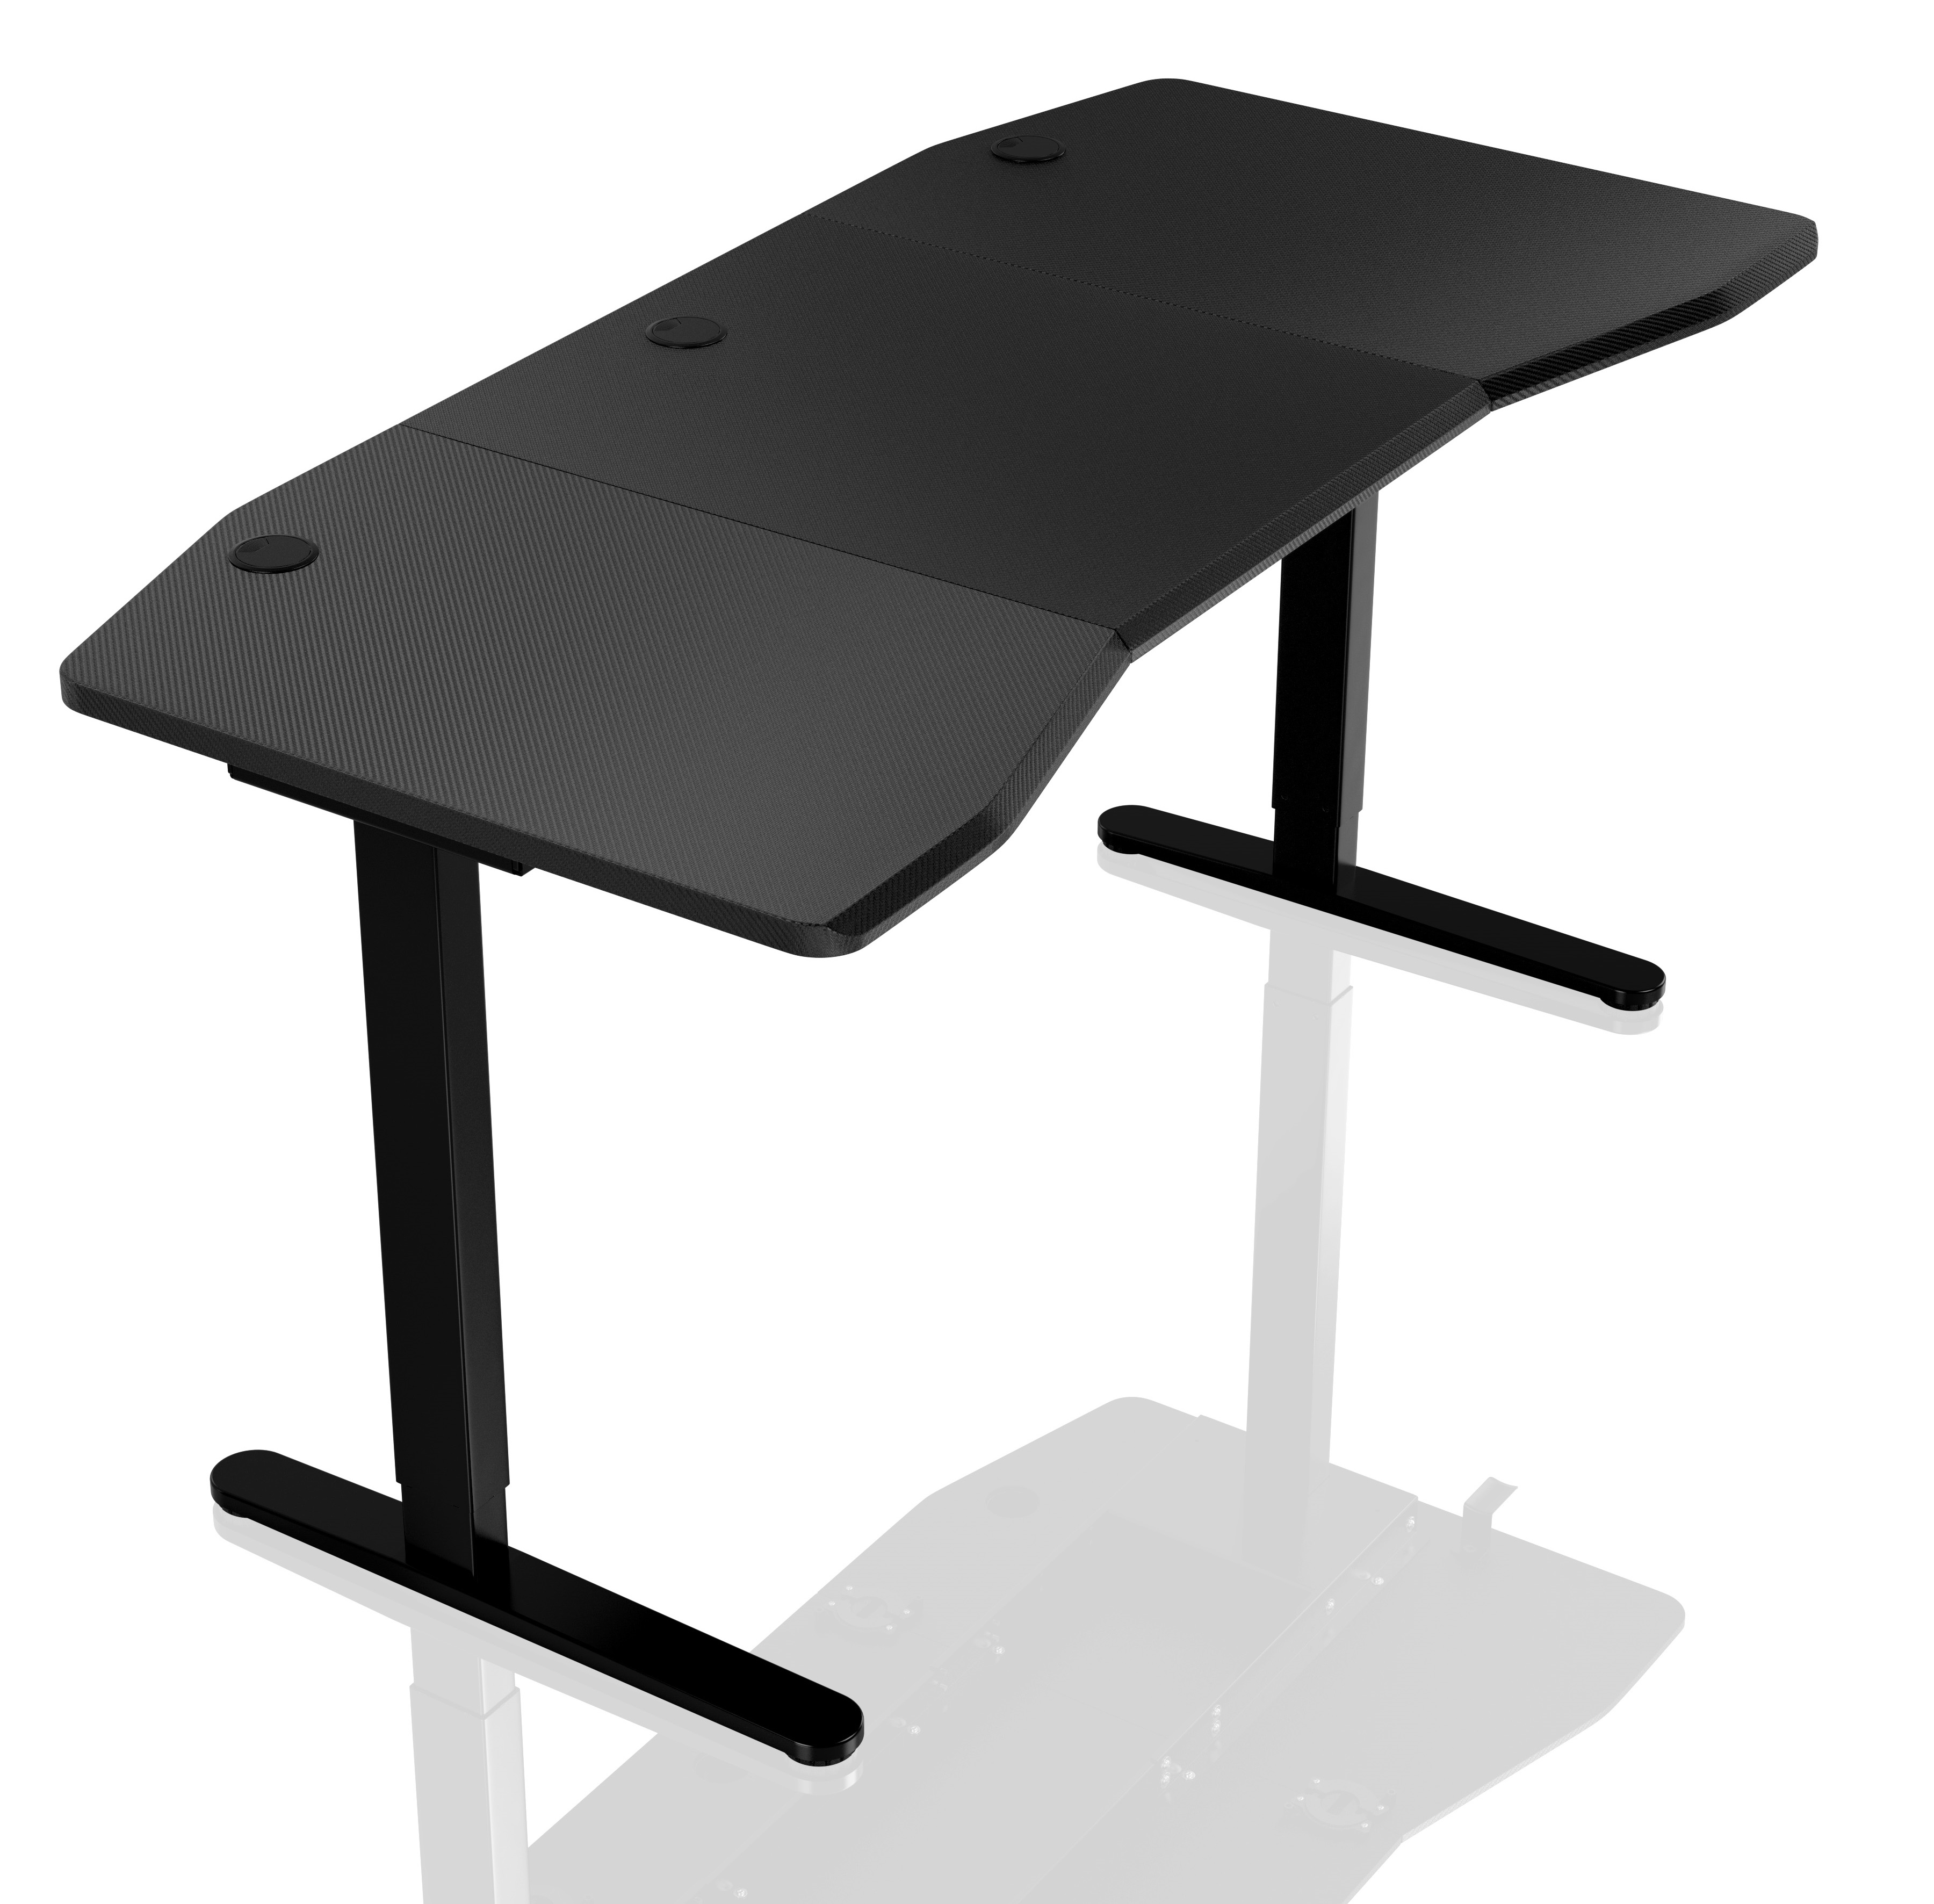 Nitro Concepts - Nitro Concepts D16M Height Adjustable Gaming Desk - Carbon Red